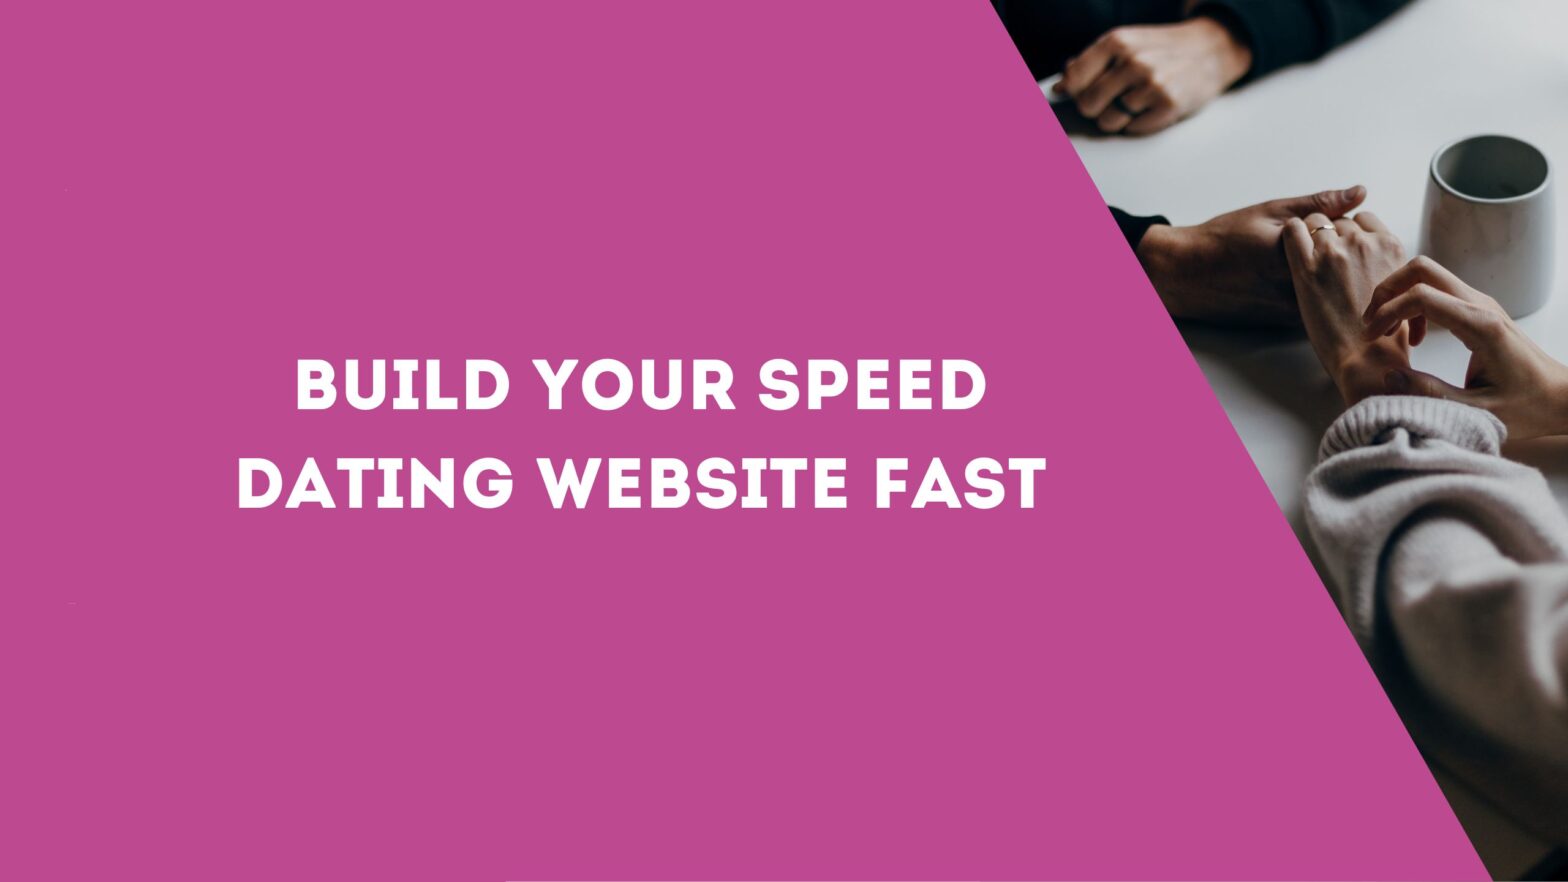 Build Your Speed Dating Website Fast